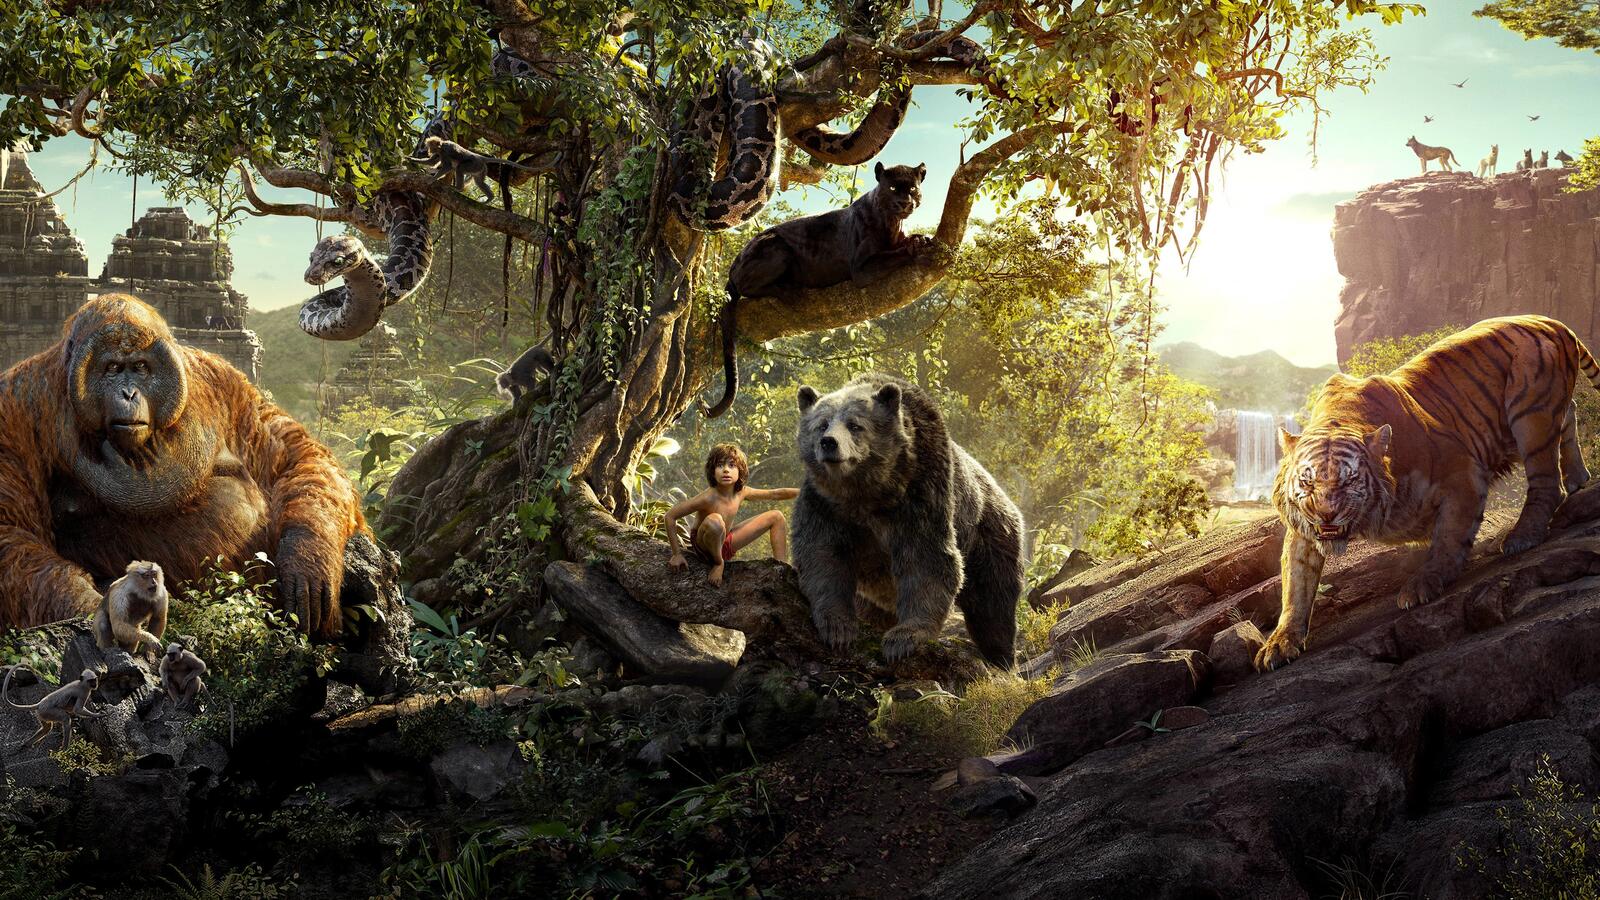 Wallpapers The Jungle Book Jungle Book Fiction on the desktop